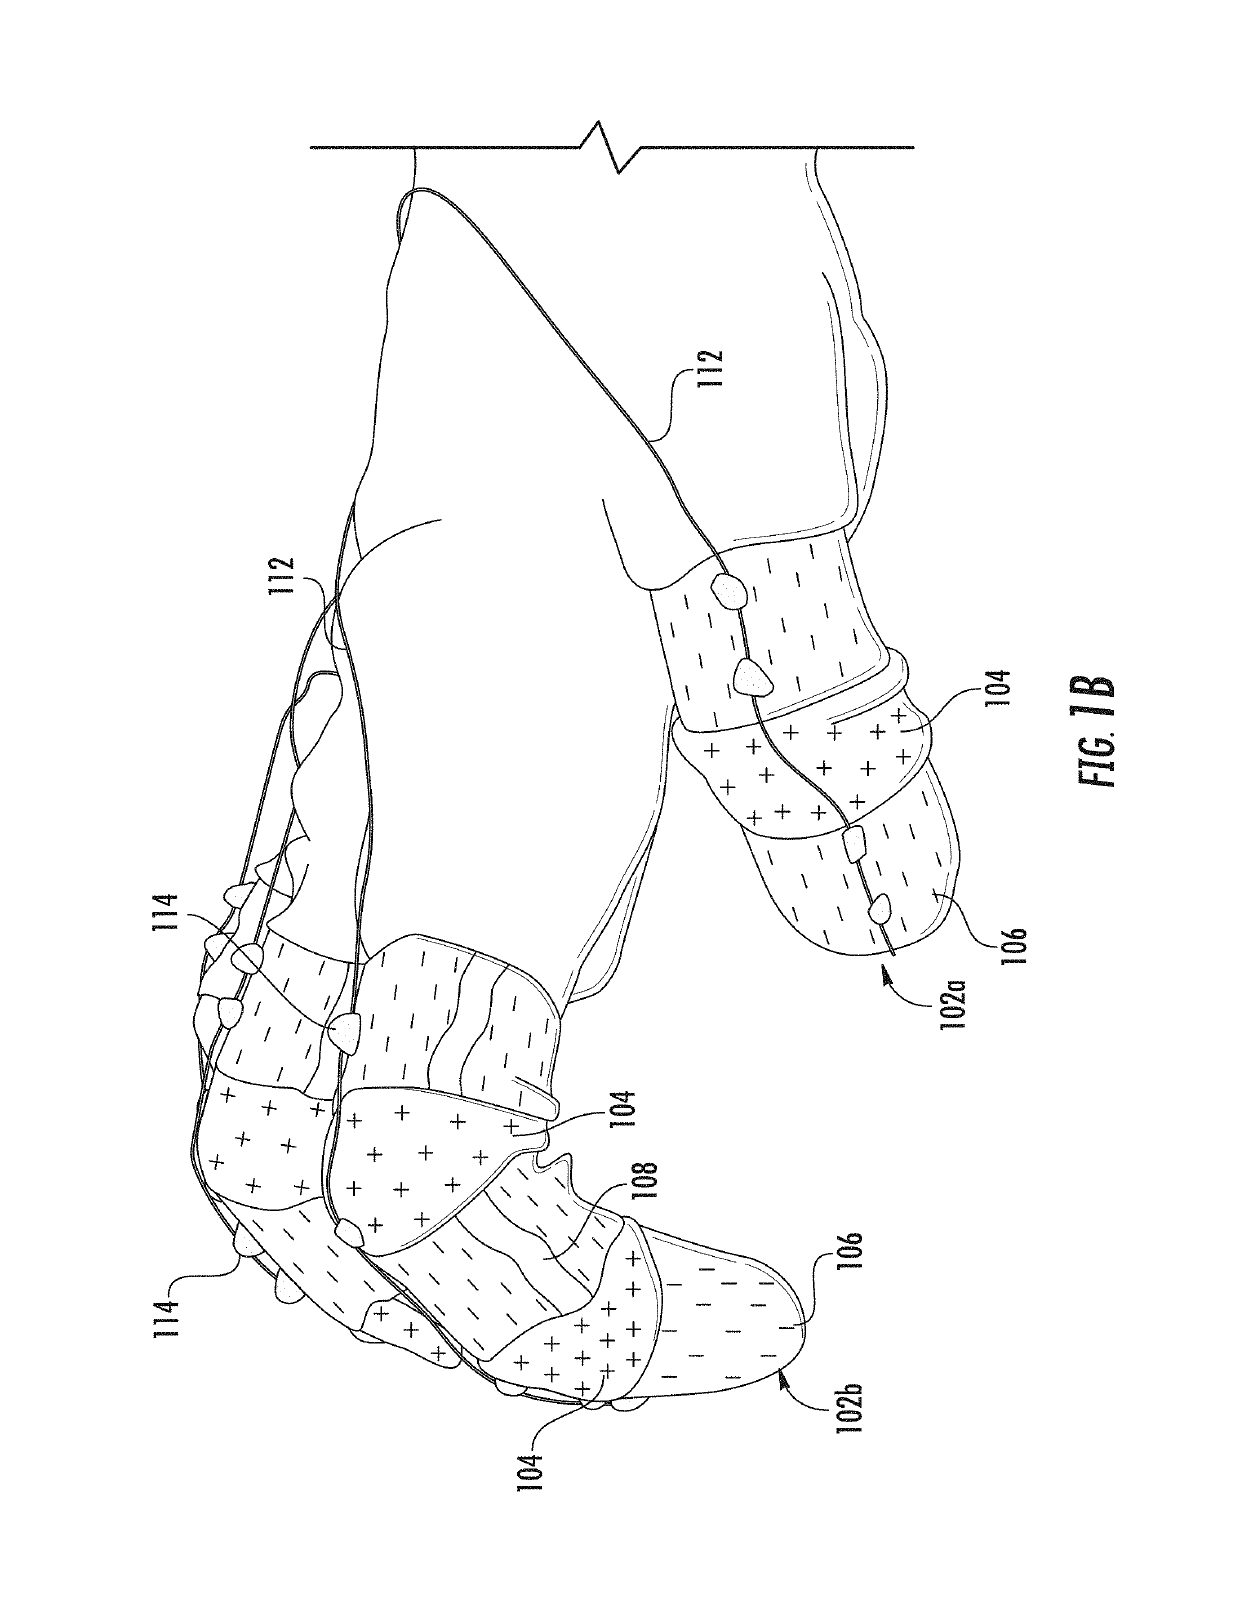 Wearable devices, wearable robotic devices, gloves, and systems, methods, and computer program products interacting with the same